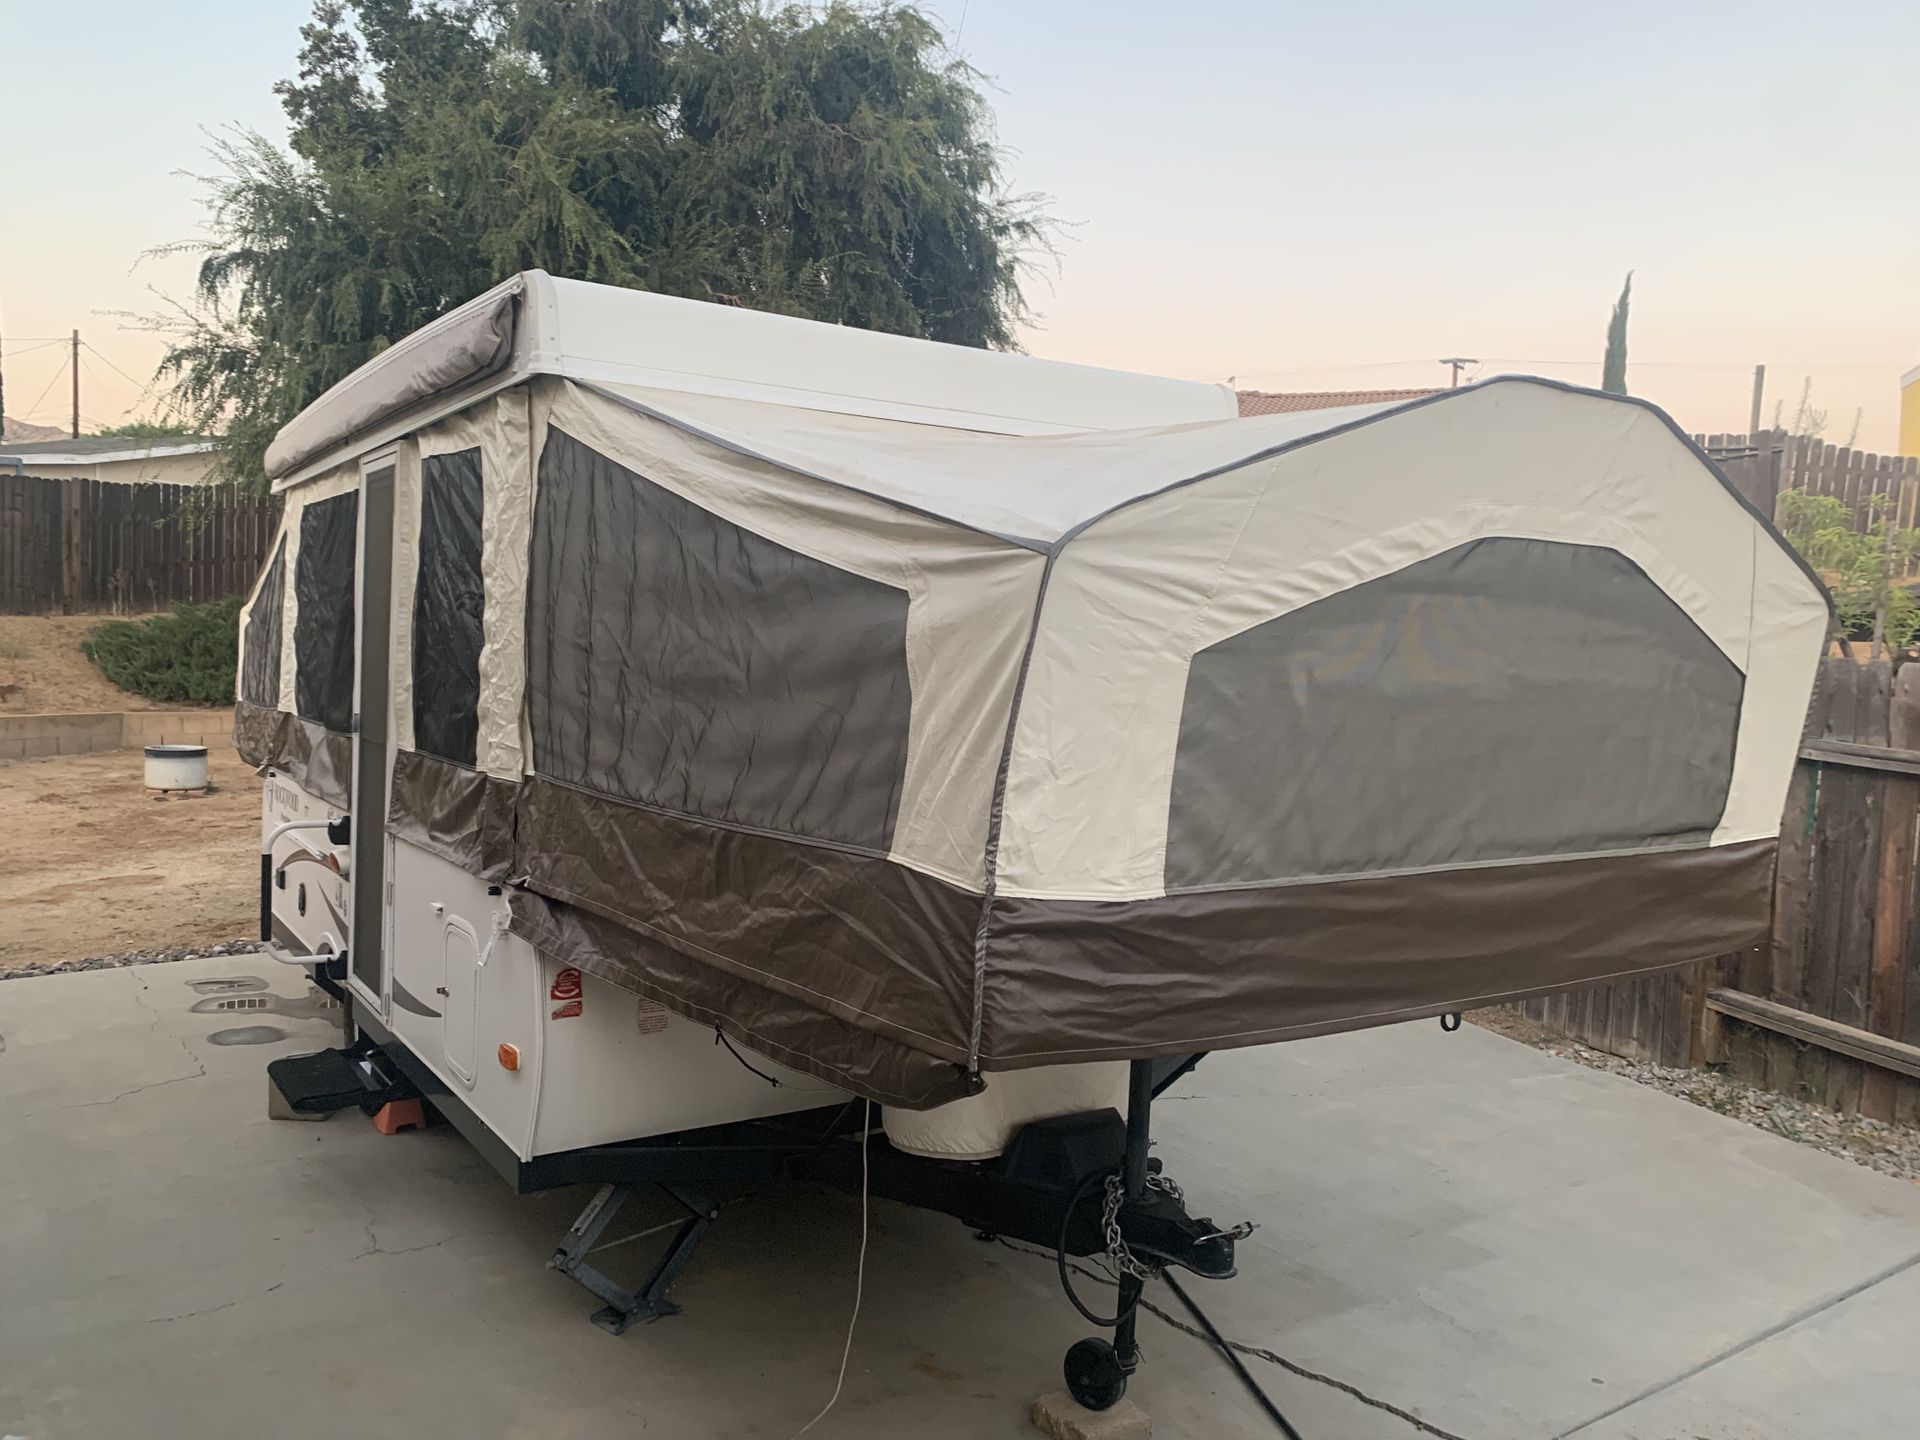 Tent Trailer- never camped in!